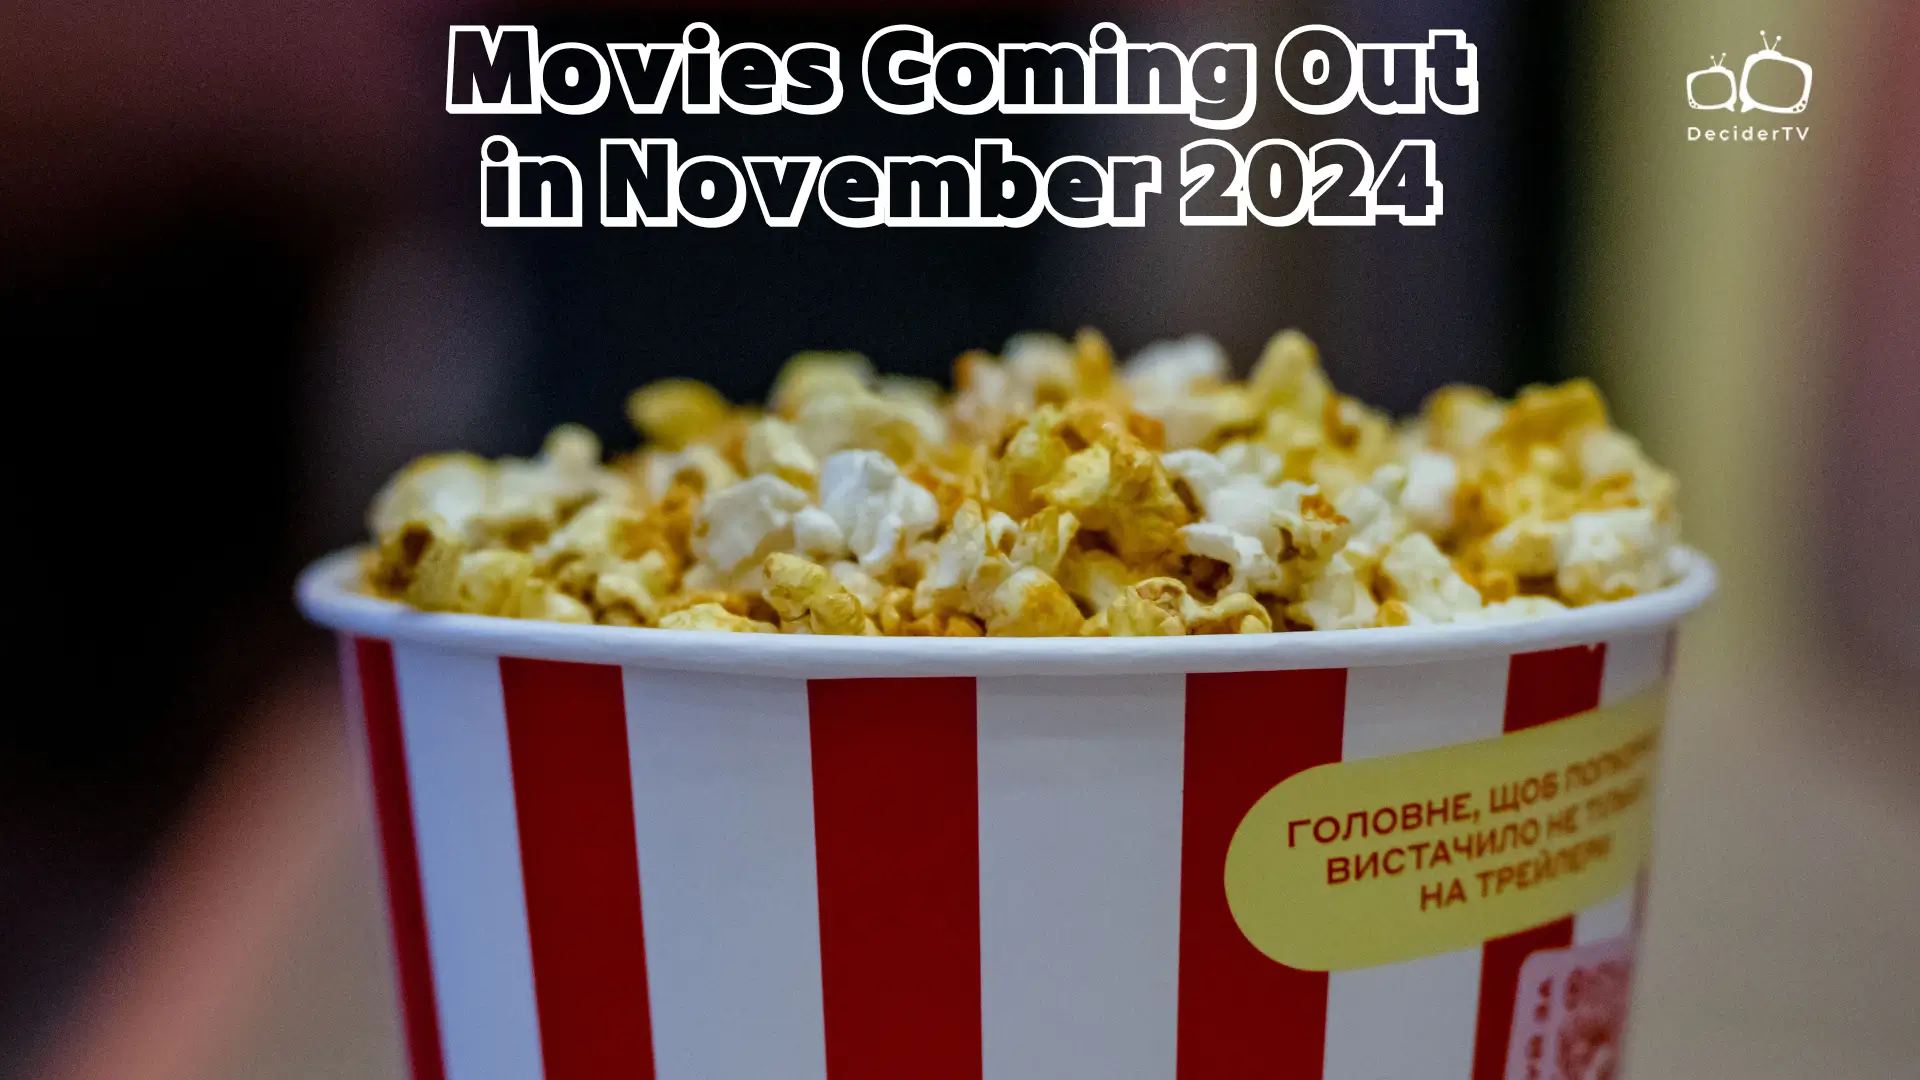 Movies Coming Out in November 2024